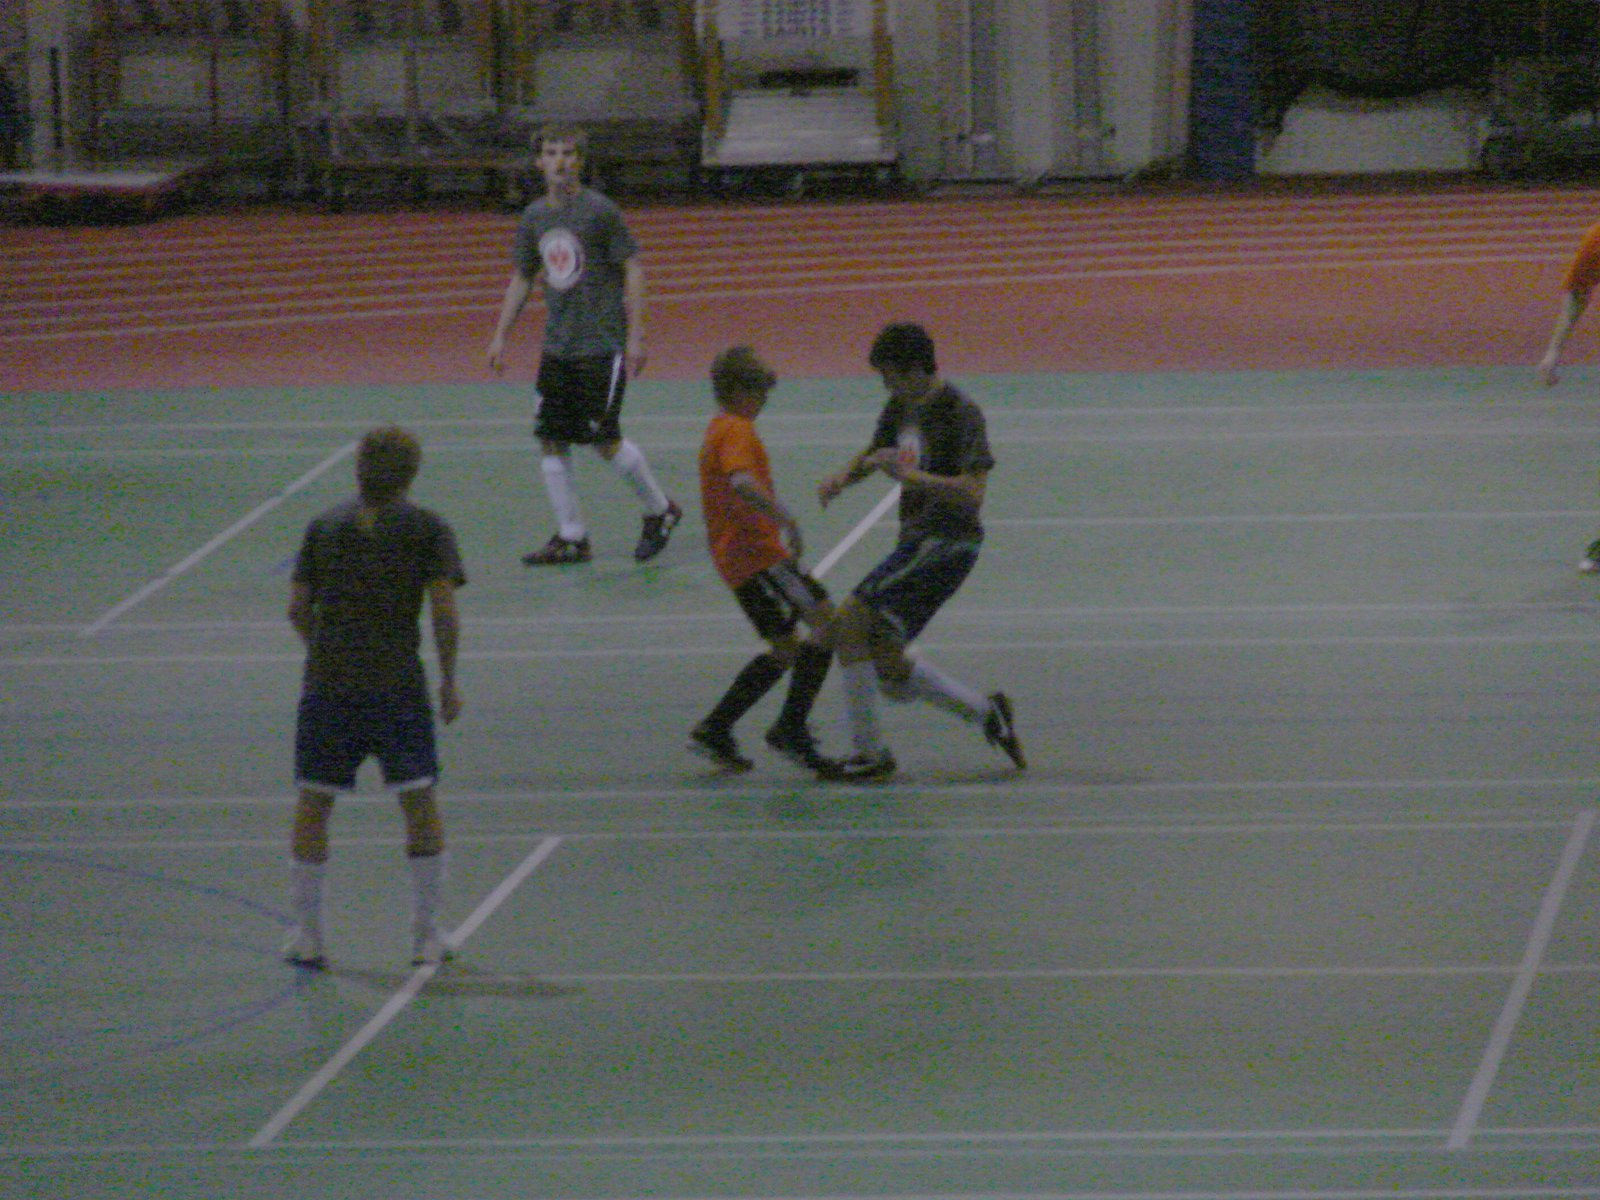 Playing indoor soccer